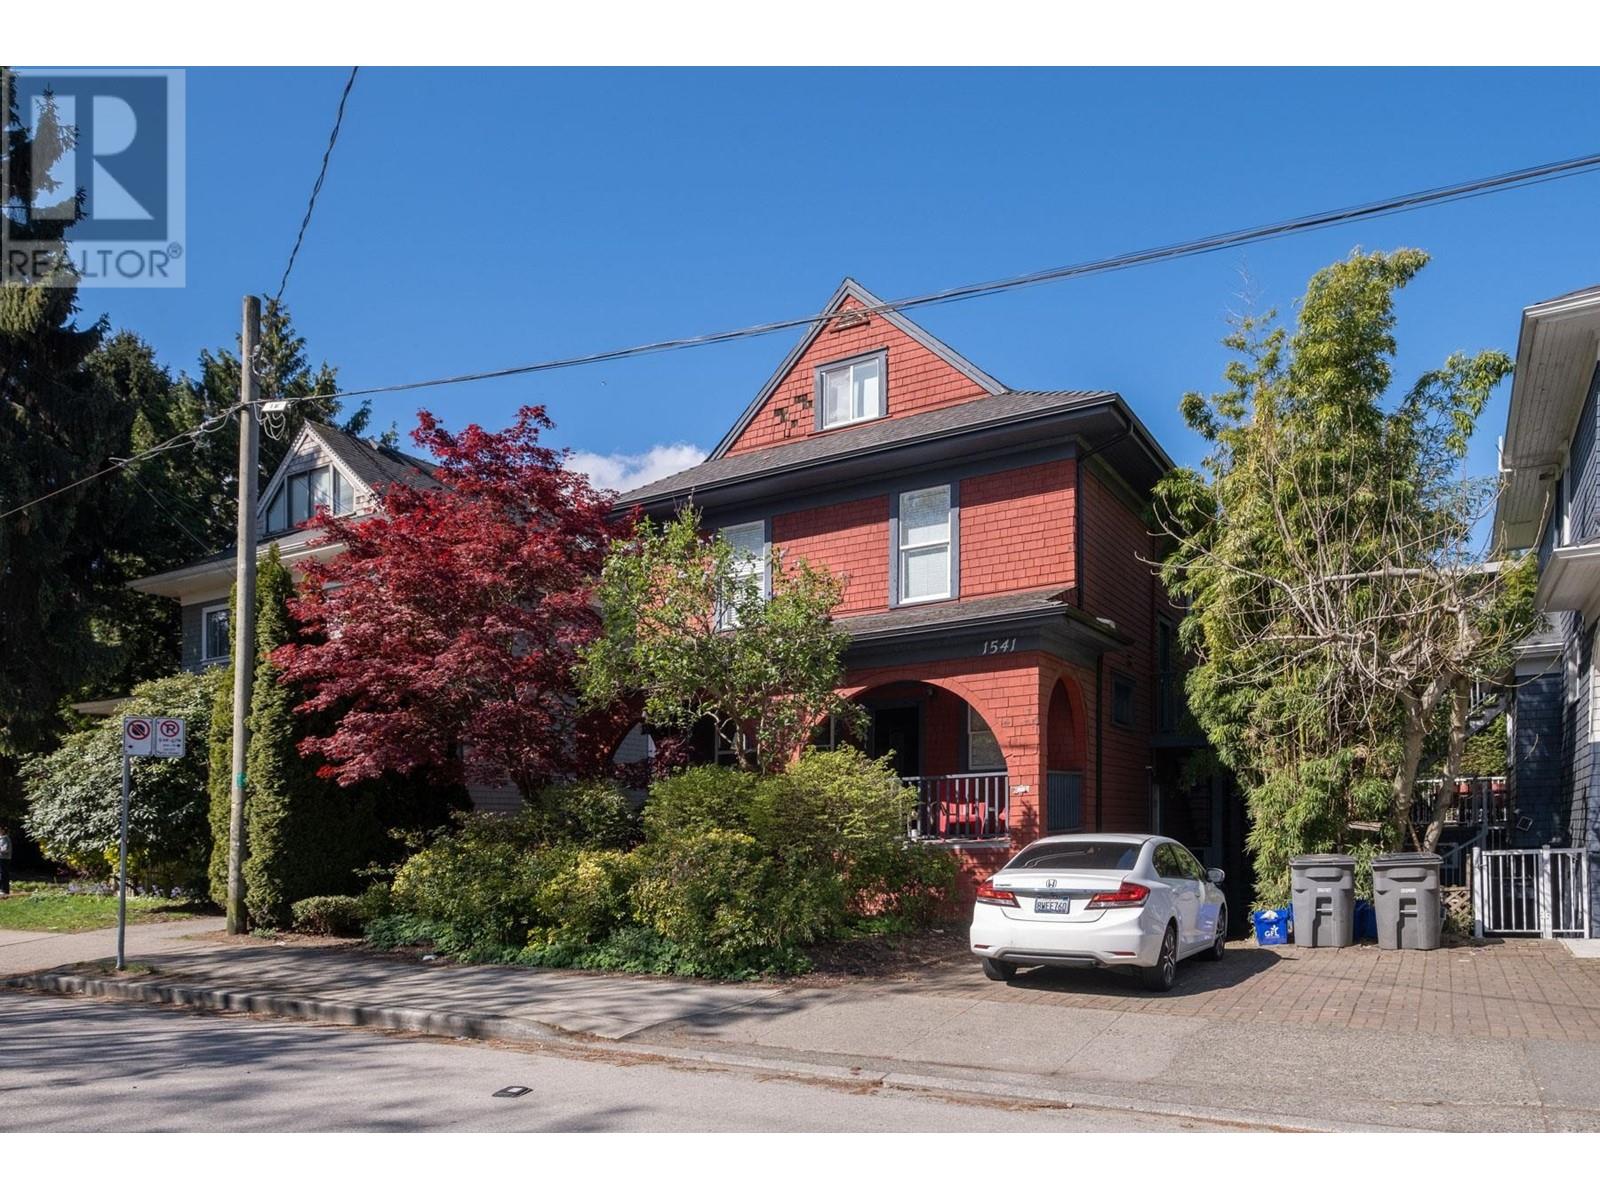 Listing Picture 2 of 27 : 1541 MAPLE STREET, Vancouver / 溫哥華 - 魯藝地產 Yvonne Lu Group - MLS Medallion Club Member